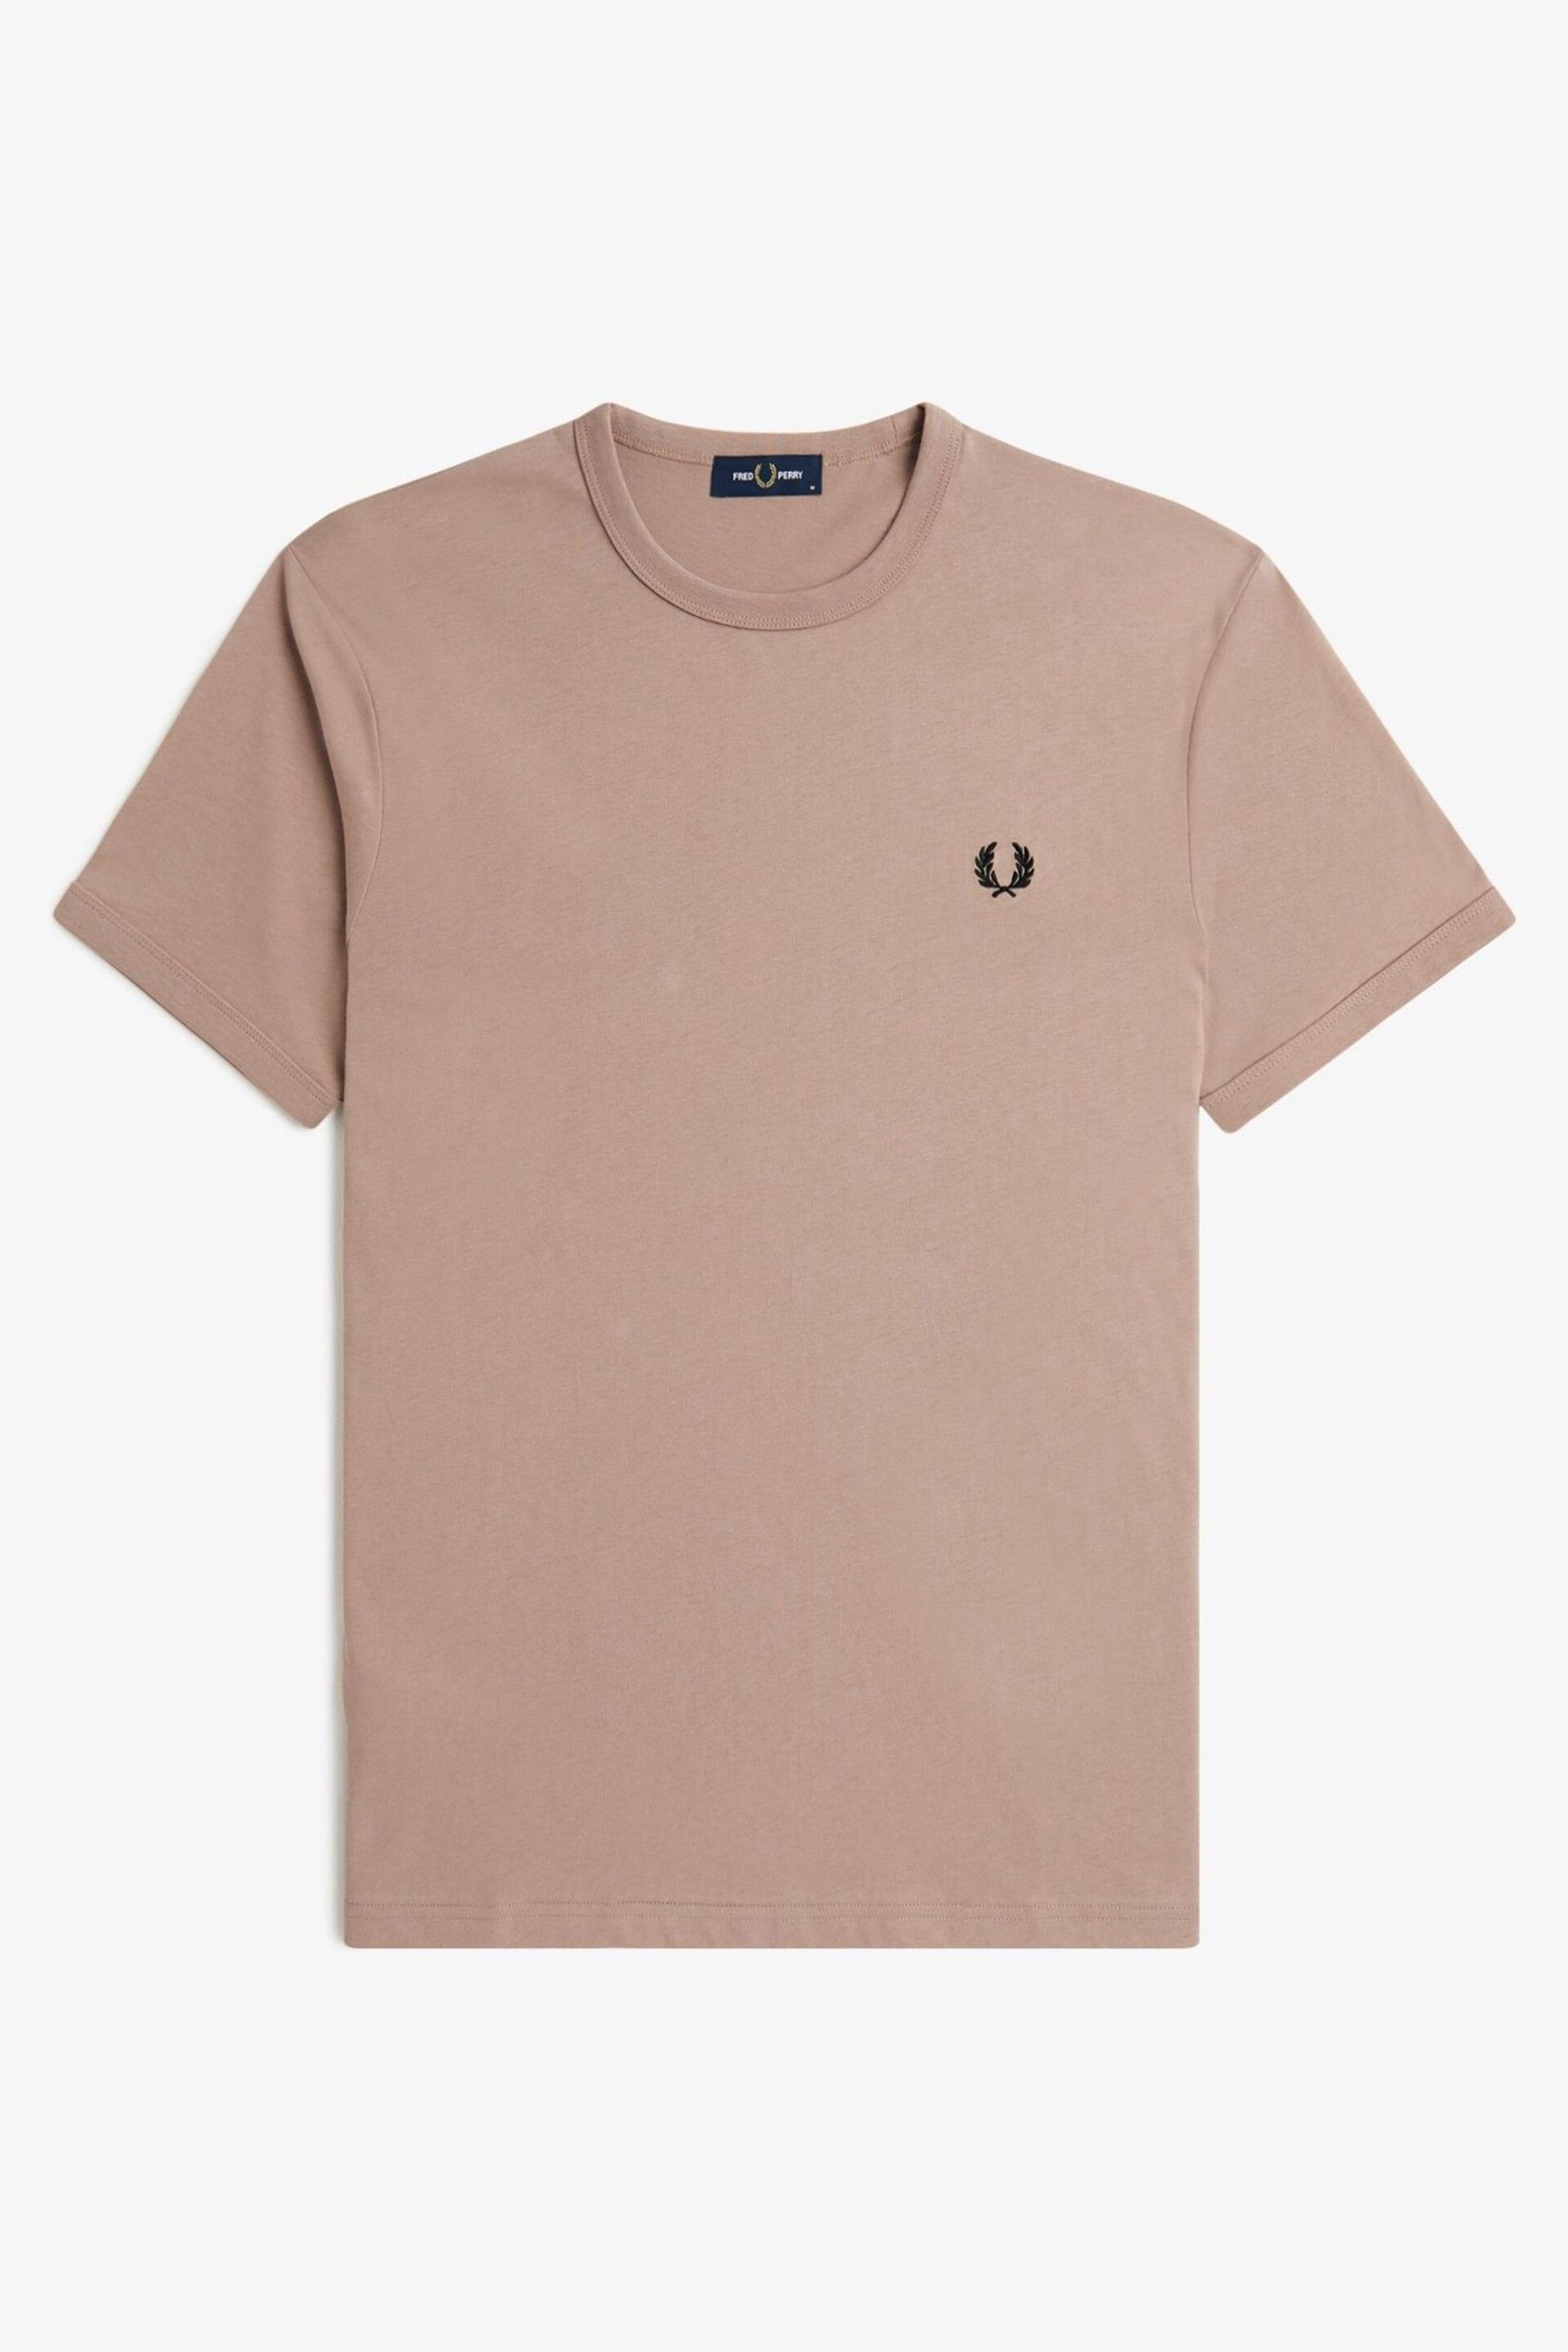 Fred Perry T-Shirt - Image 5 of 6